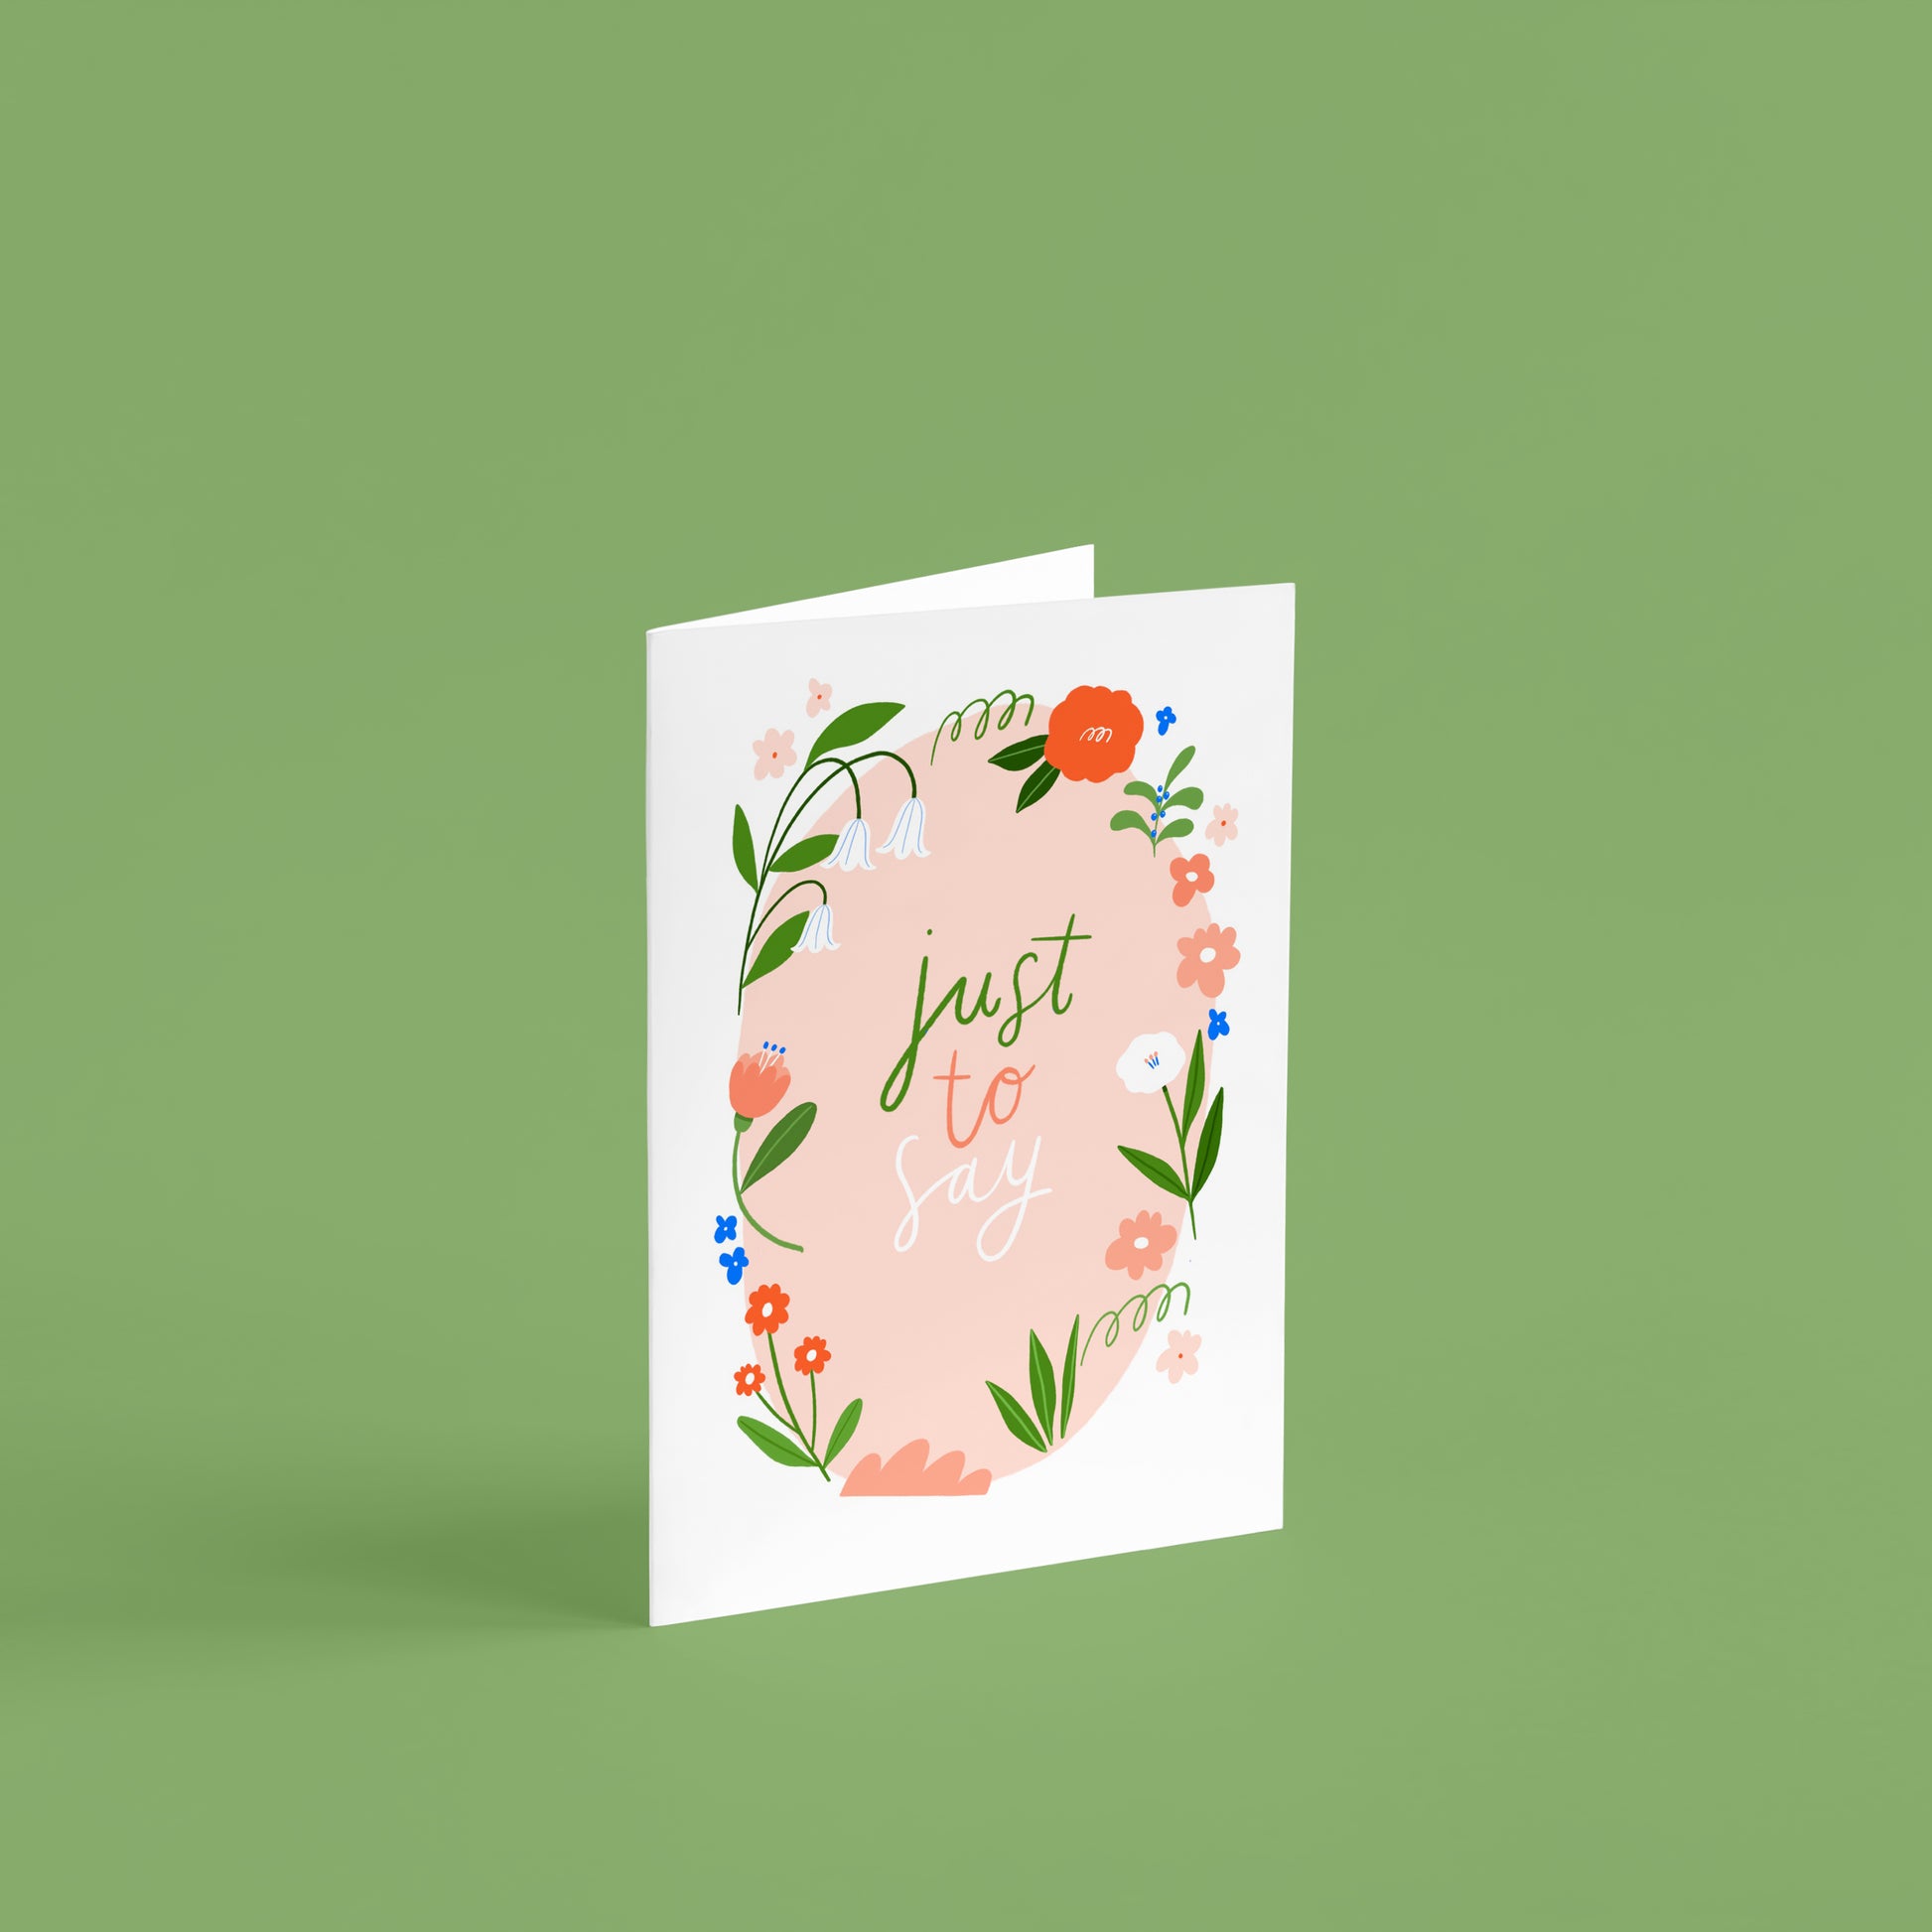 A6 greetings card 'just to say' pink oval shape with a delicate floral border